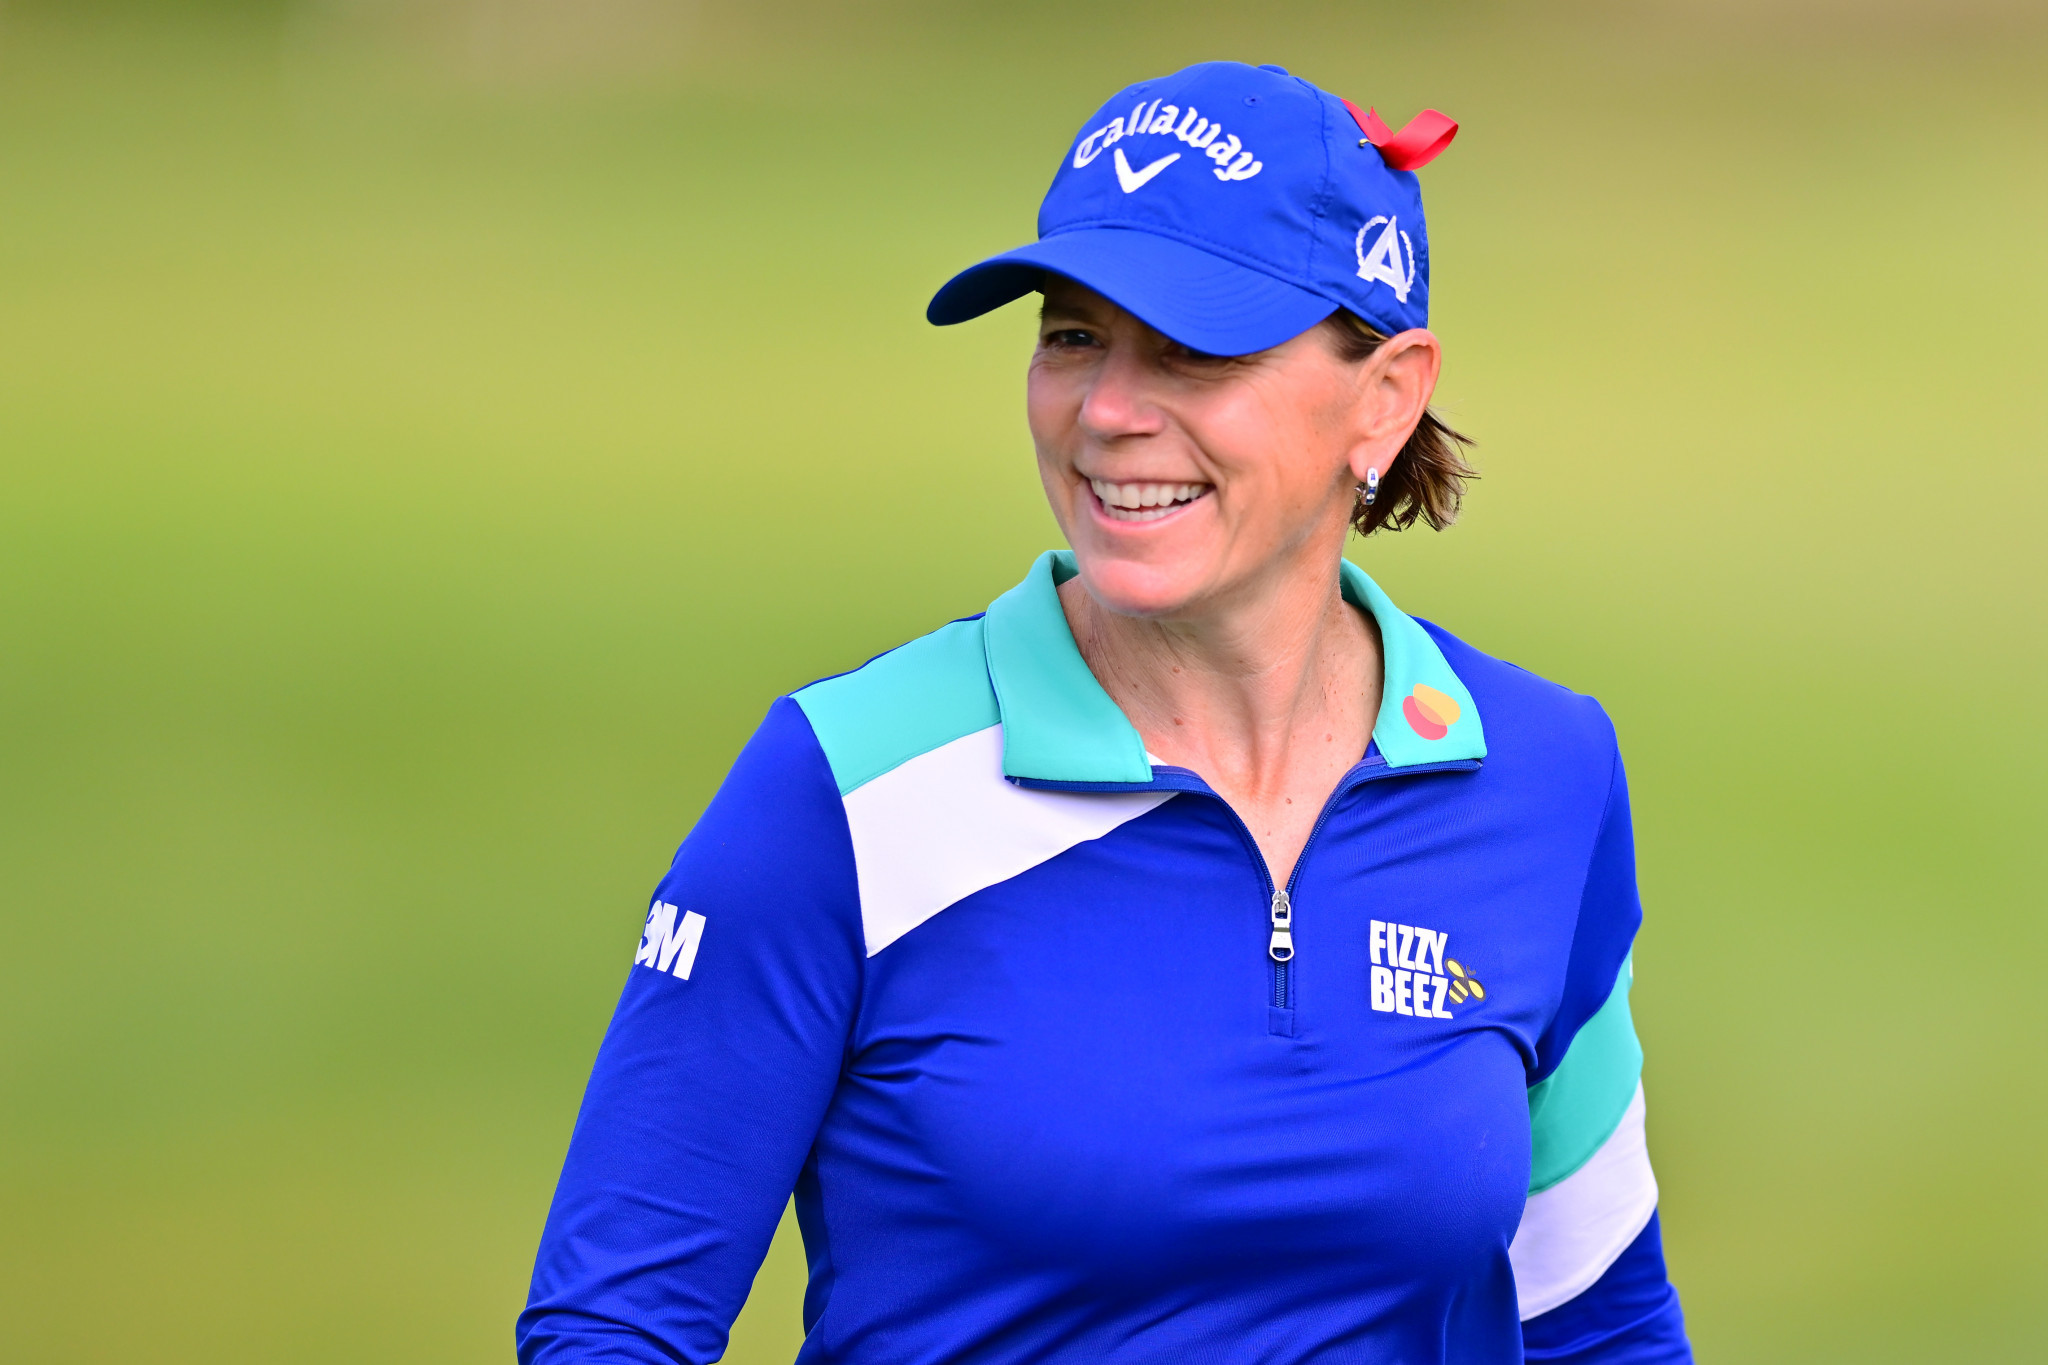 International Golf Federation President Annika Sörenstam is the most followed leader of a world governing body on Twitter, but leaders have been urged to 